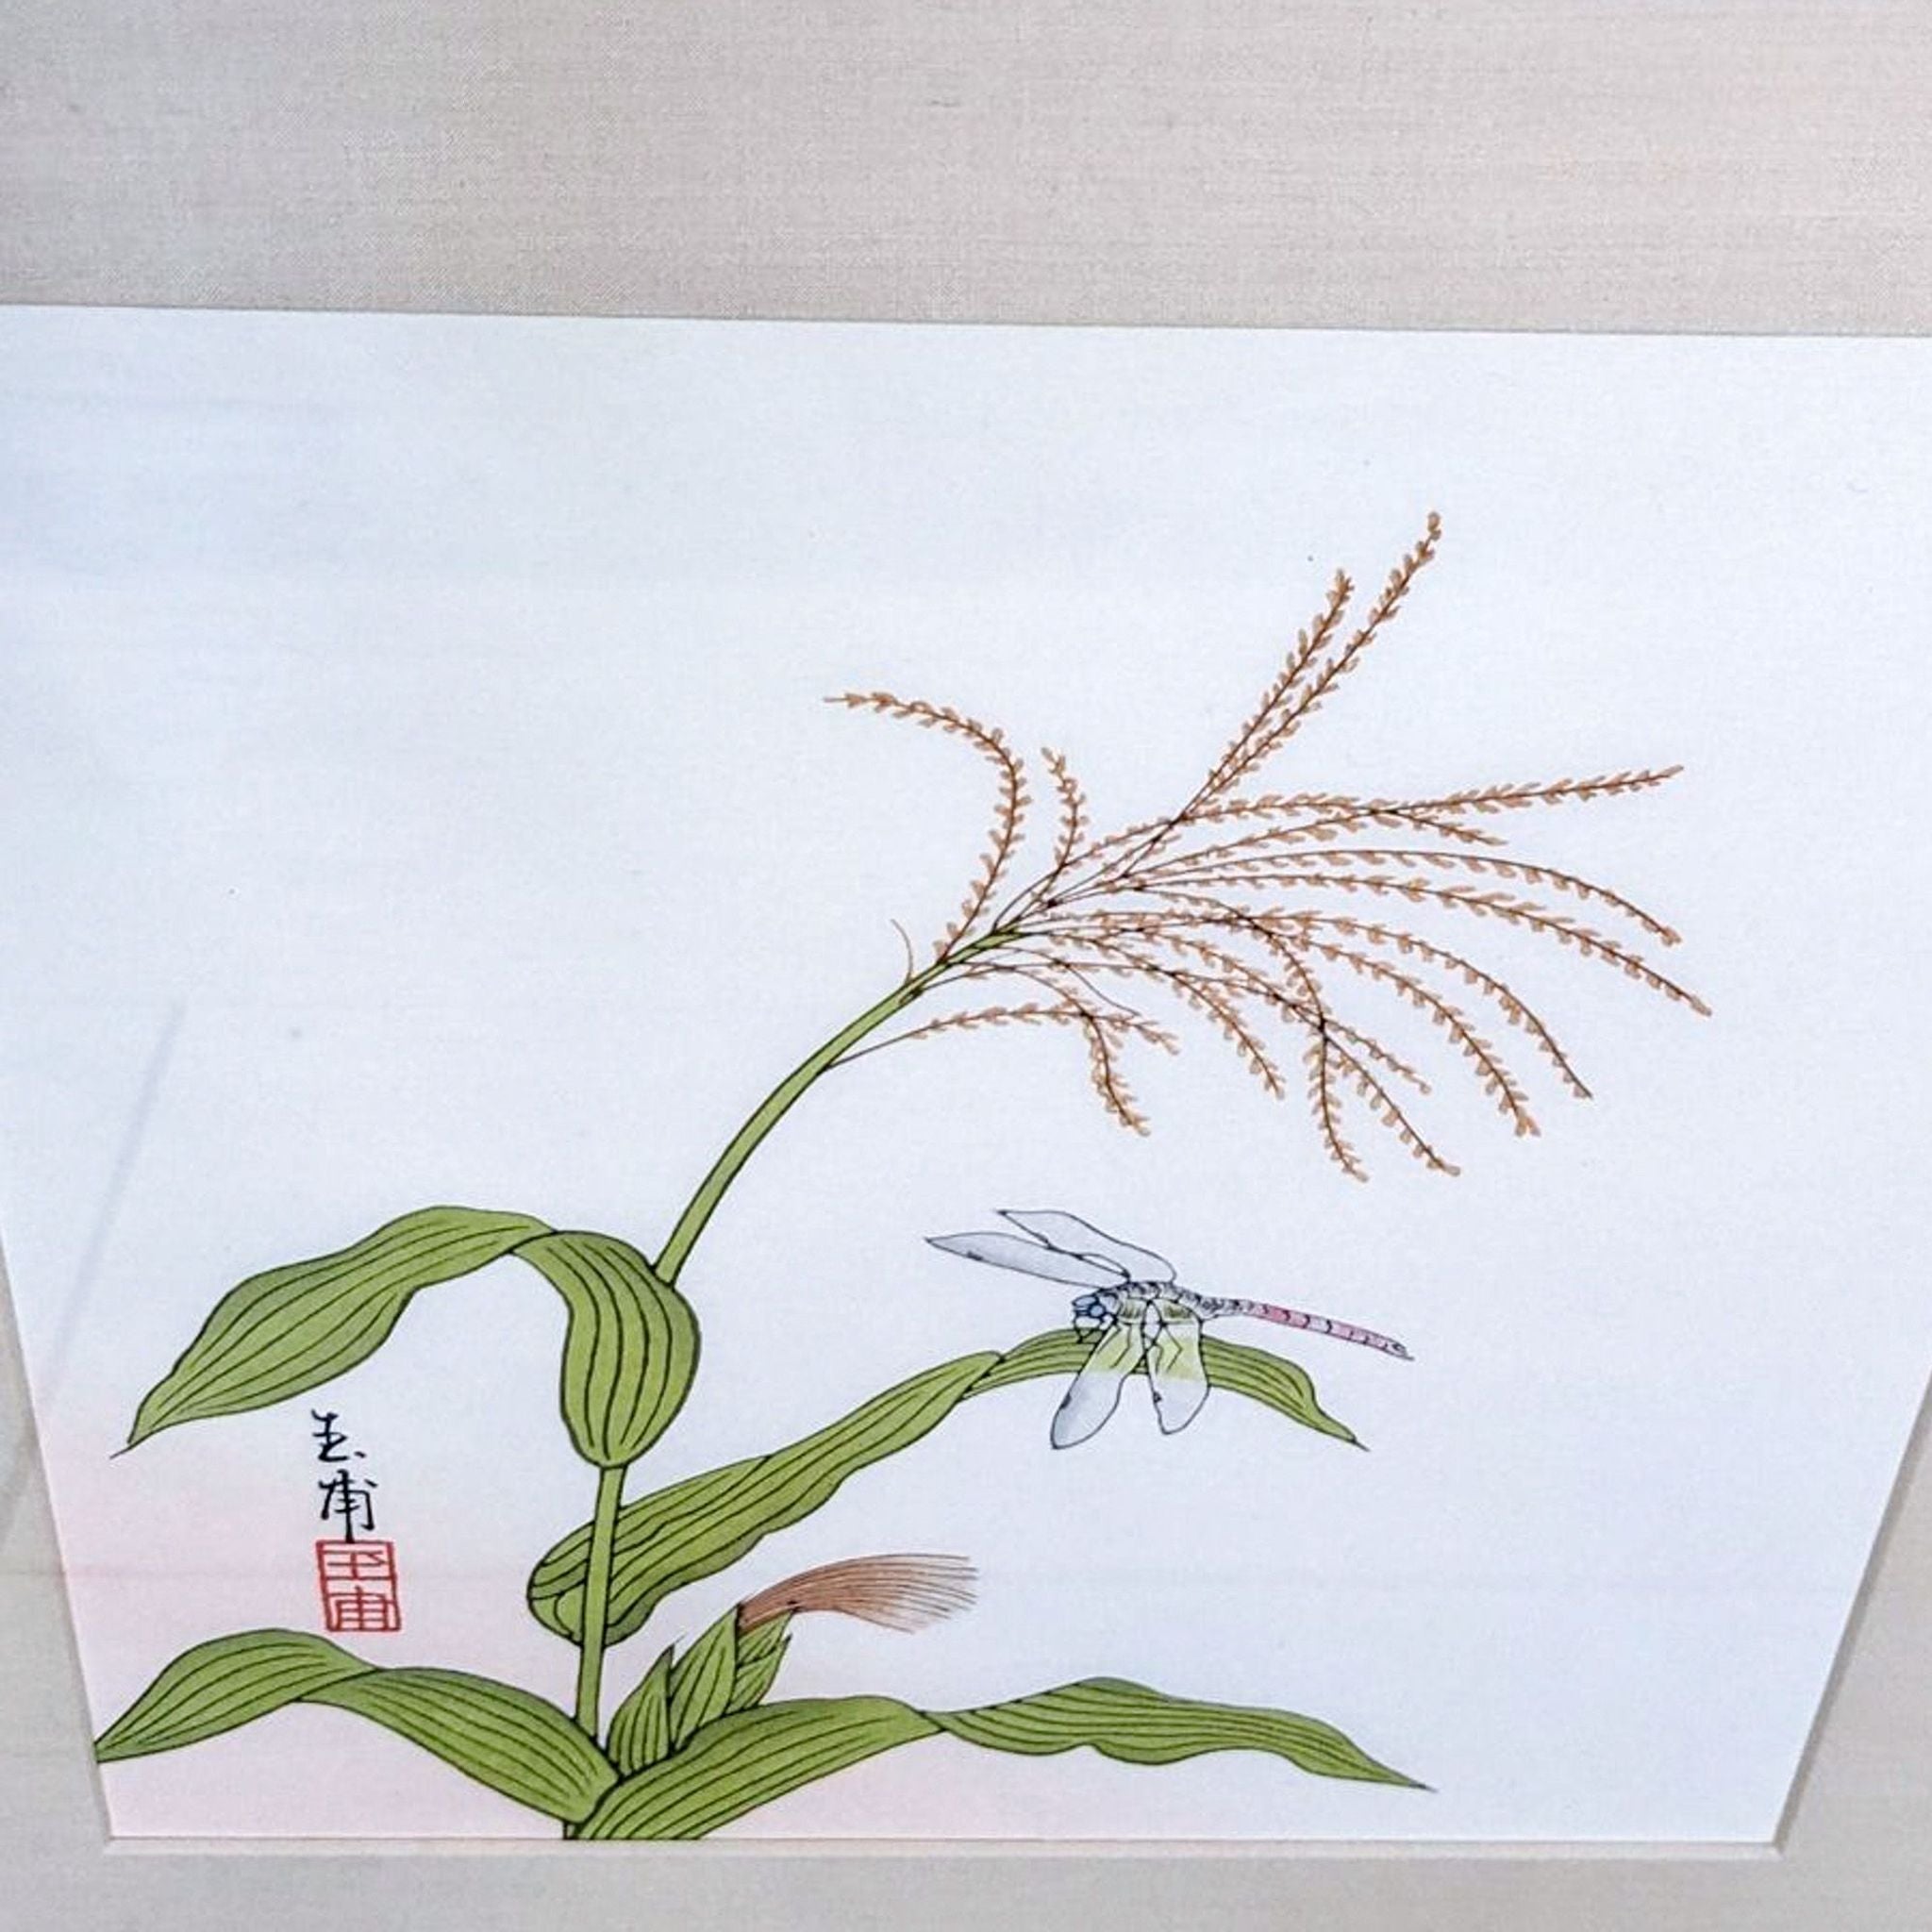 Tranquil botanical artwork with feathery plant details and an intricate dragonfly, adorned with Asian script, from Reperch brand.